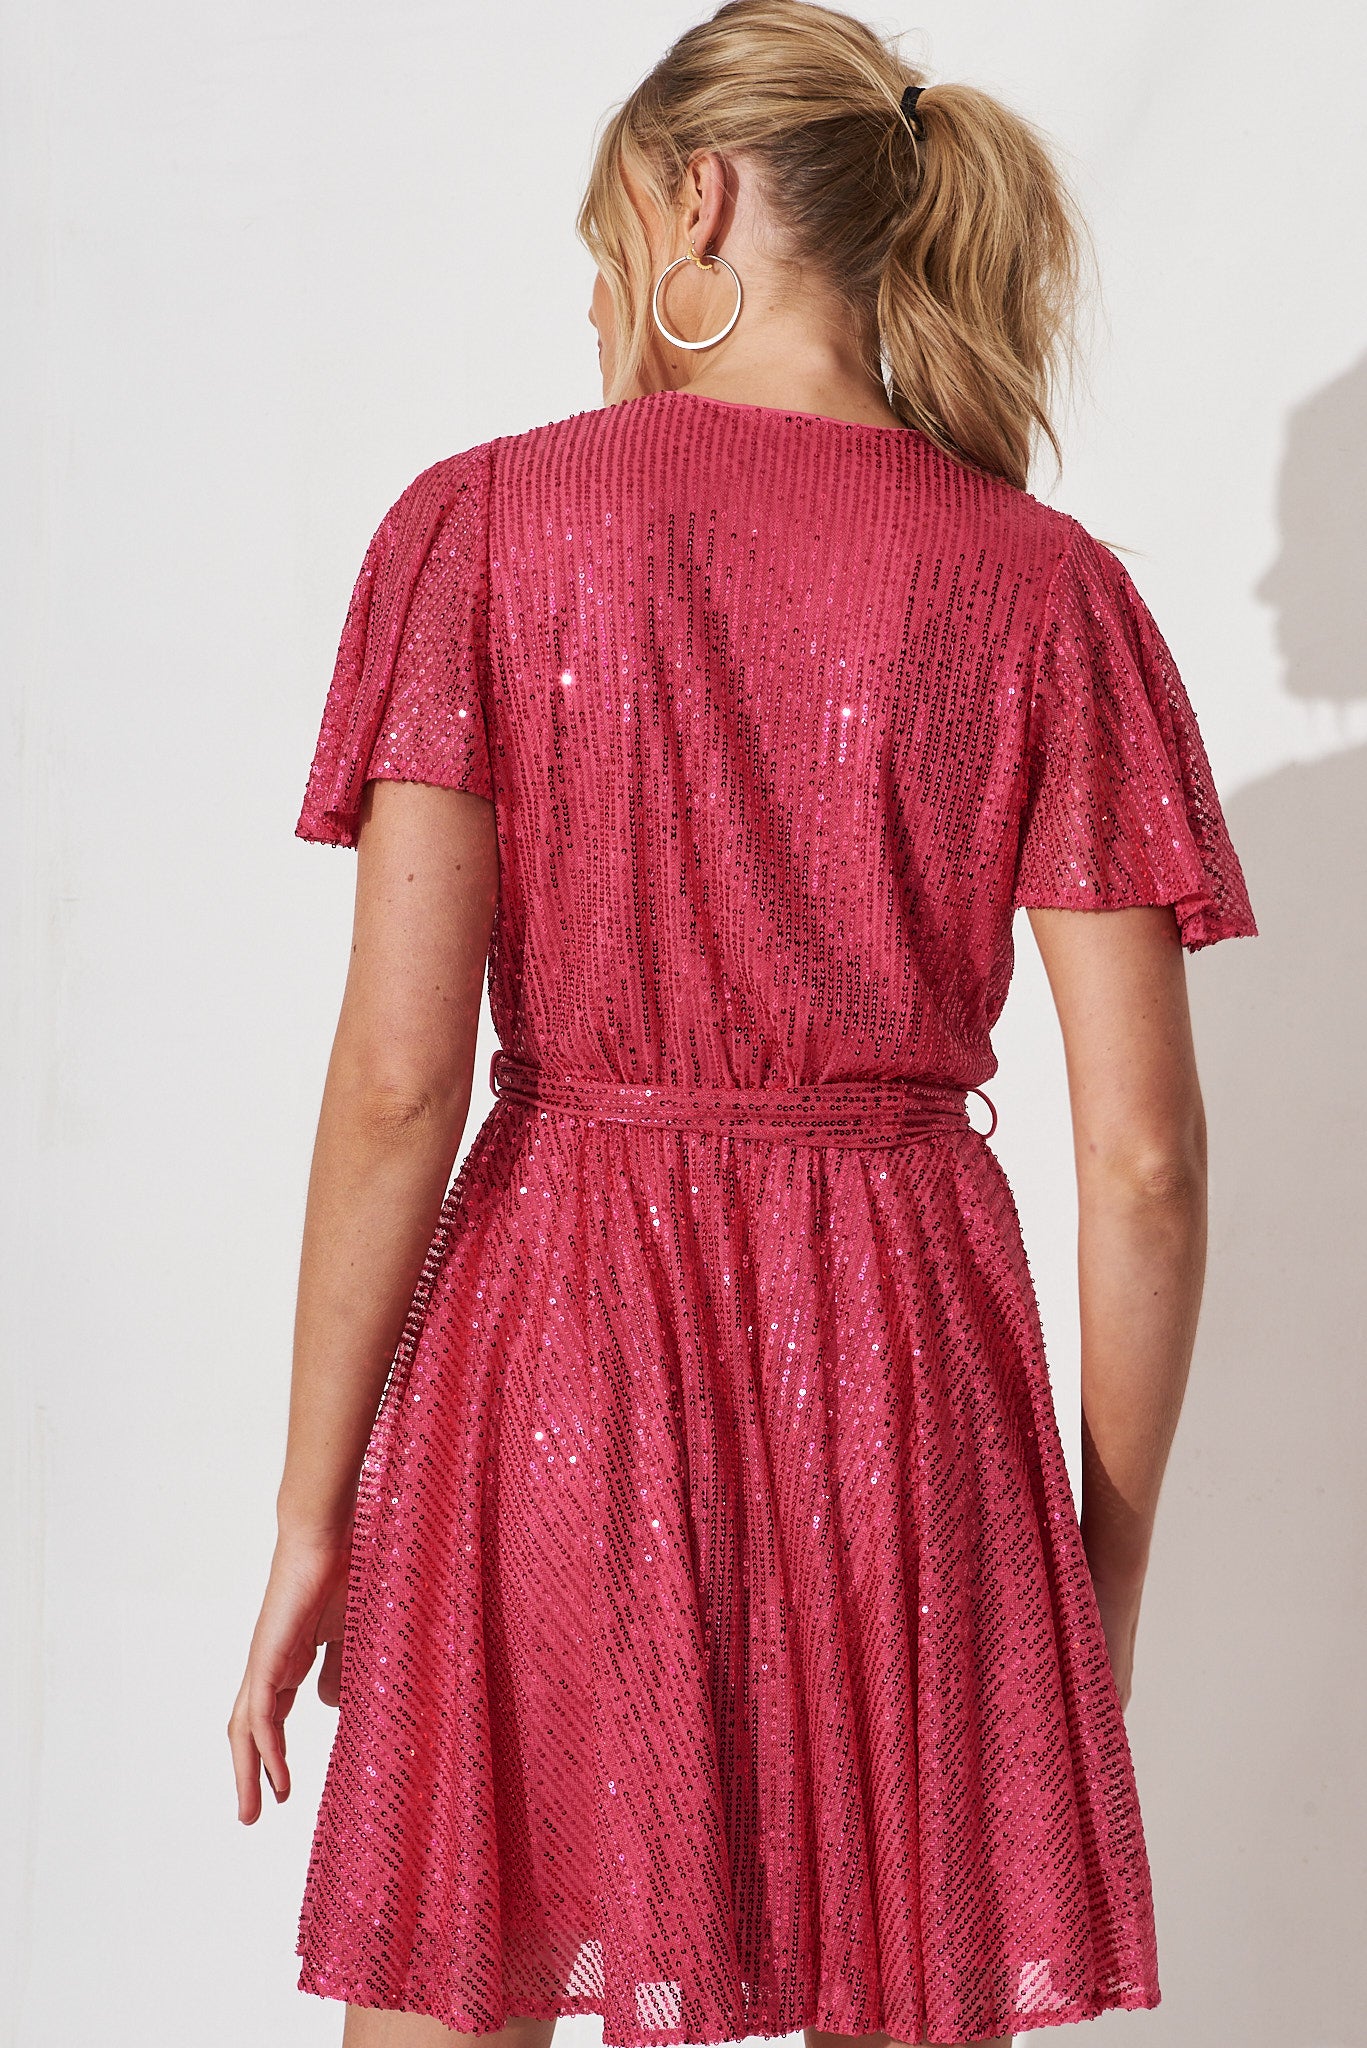 Amoretto Dress In Hot Pink Sequin – St Frock